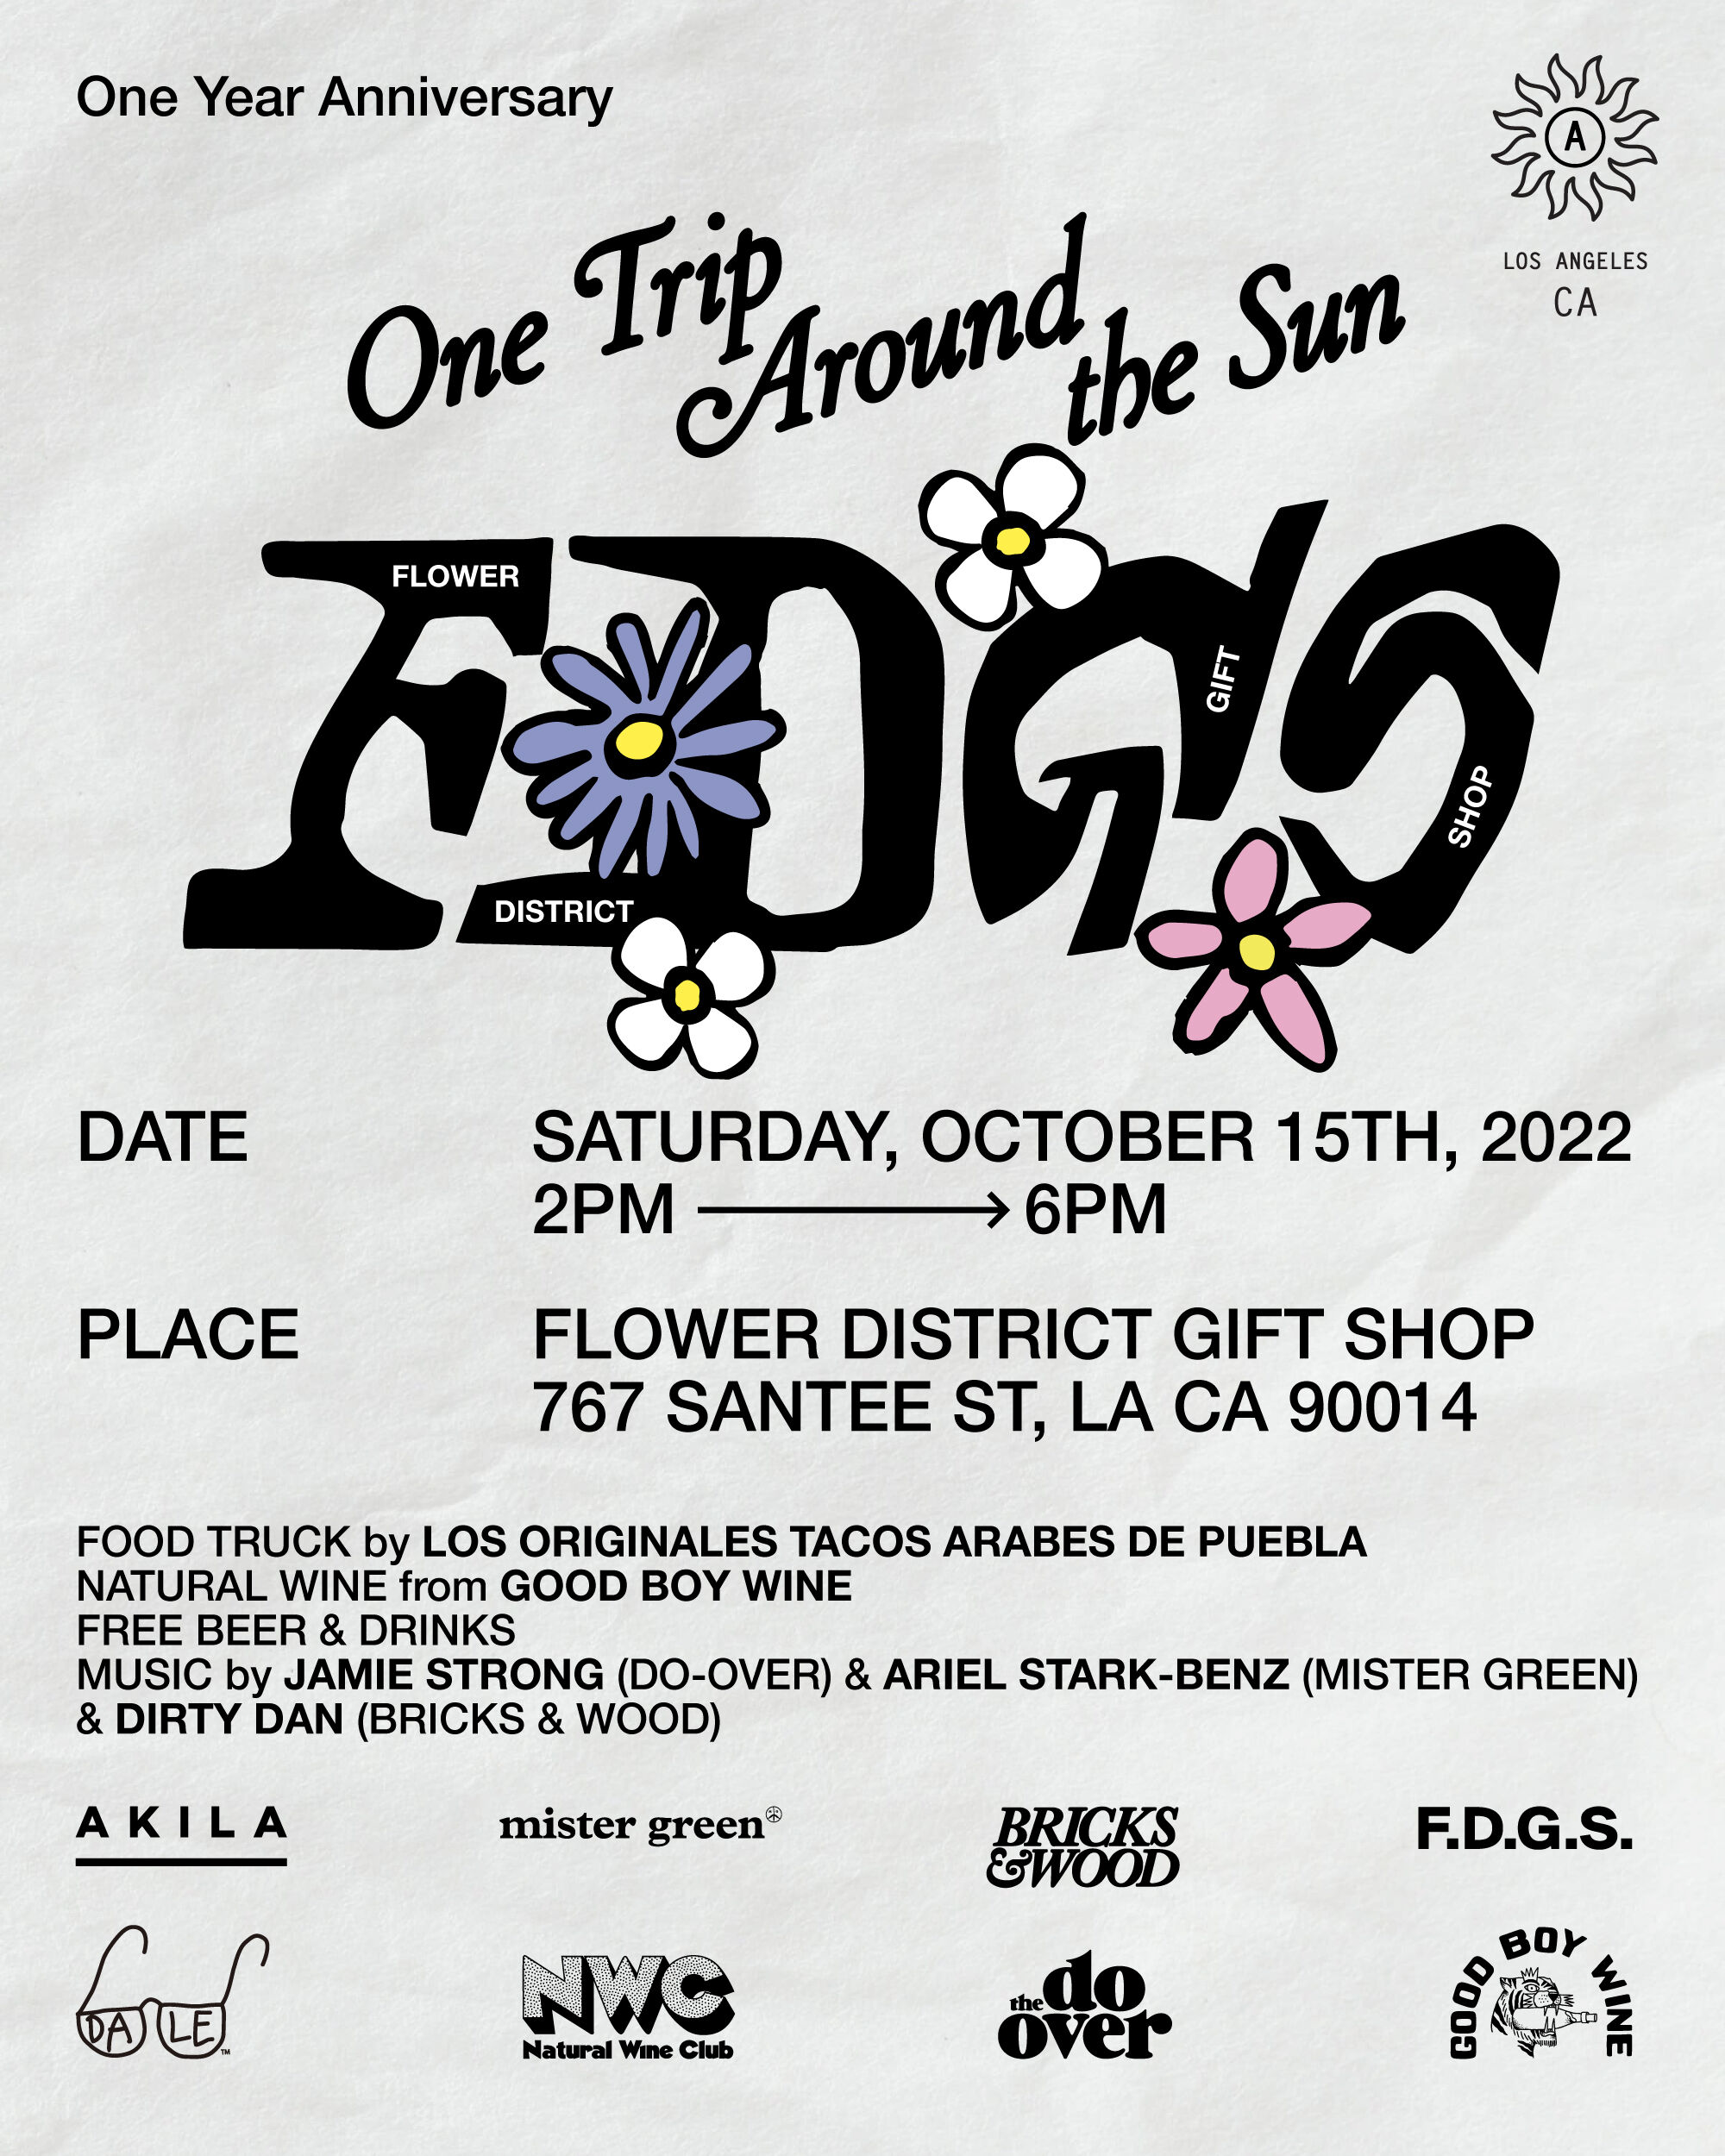 One Year Anniversary Ot q?c%o":be Sun 9 ;g DATE SATURDAY, OCTOBER 15TH, 2022 2PM 6PM PLACE FLOWER DISTRICT GIFT SHOP 767 SANTEE ST, LA CA 90014 FOOD TRUCK by LOS ORIGINALES TACOS ARABES DE PUEBLA NATURAL WINE from GOOD BOY WINE FREE BEER DRINKS MUSIC by JAMIE STRONG DO-OVER ARIEL STARK-BENZ MISTER GREEN DIRTY DAN BRICKS WOOD AKILA mister green BRICKS .D.G.S. AKILA BRILKS F.D.G.S : 80y : :hedo S Y i @g dver g2 